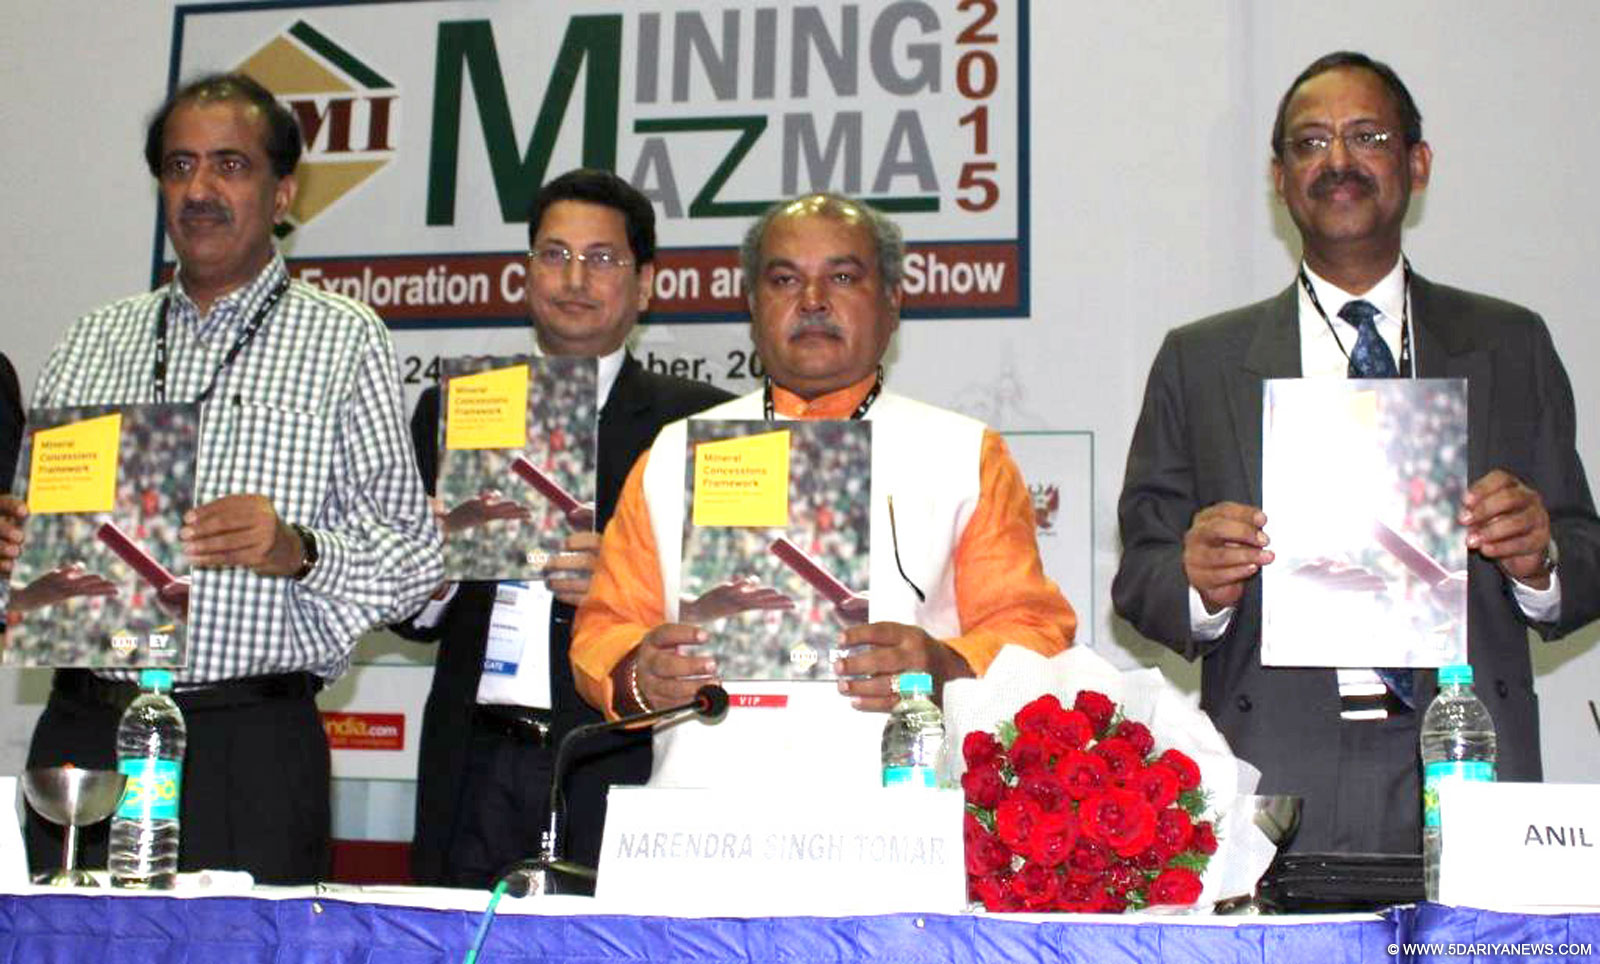 The Union Minister for Mines and Steel, Shri Narendra Singh Tomar releasing a book ‘Mineral Concessions Framework’, at the inauguration of the Mining Mazma-2015, in Bengaluru on September 24, 2015. The Secretary (Mines) Shri Balvinder Kumar and the Secretary (Coal), Shri Anil Swarup are also seen.